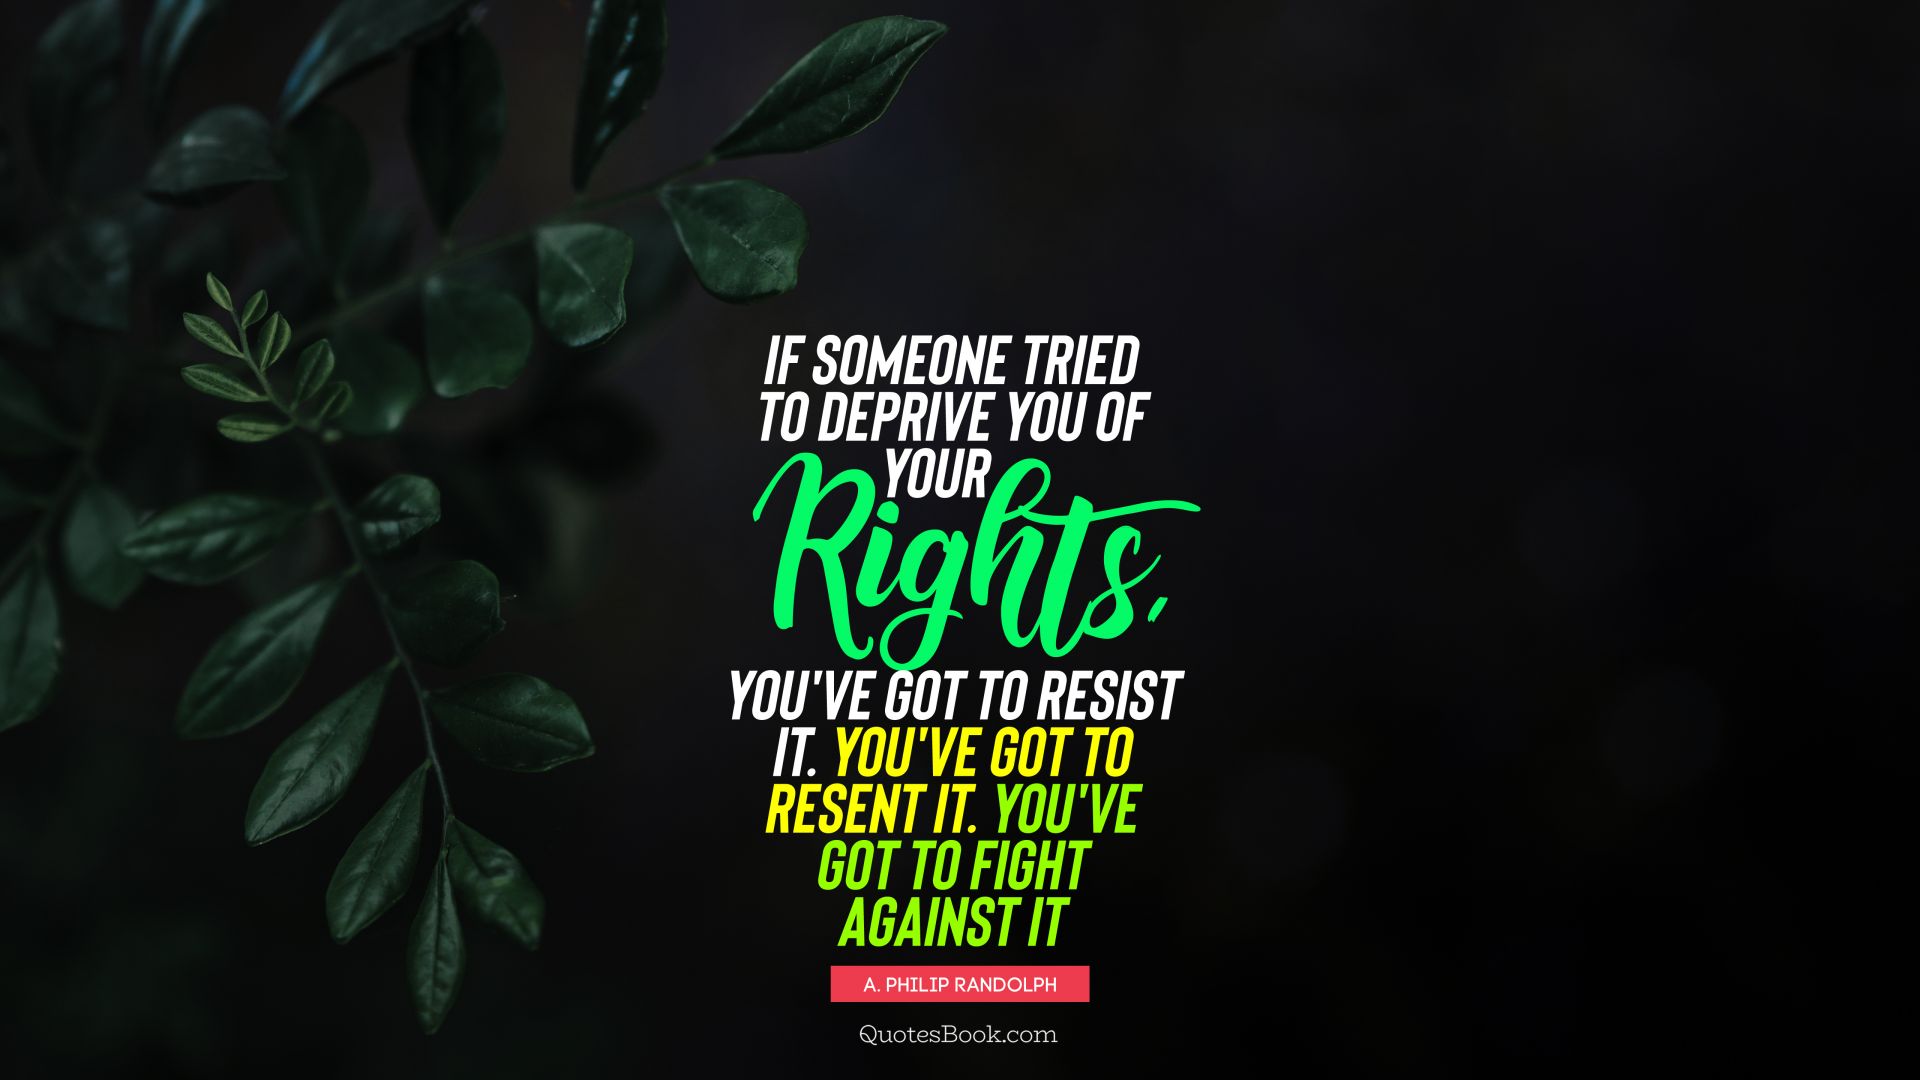 If someone tried to deprive you of your rights, you've got to resist it. You've got to resent it. You've got to fight against it. - Quote by A. Philip Randolph